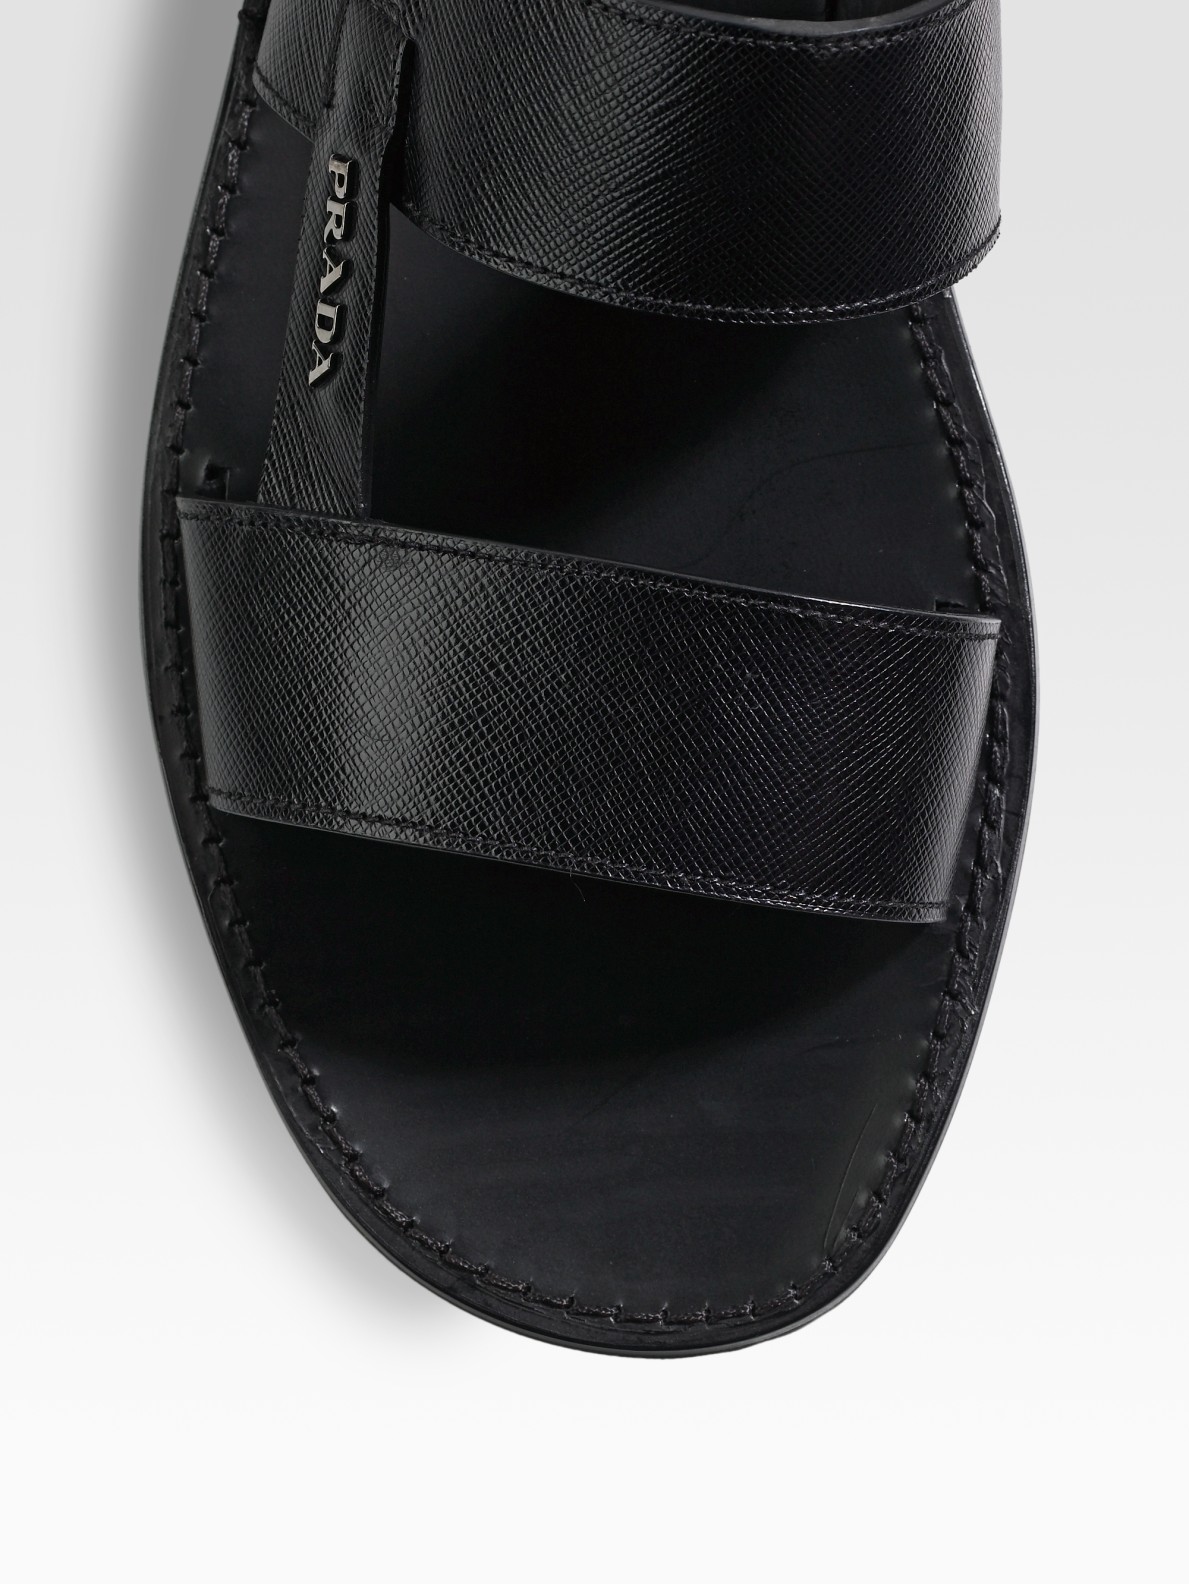 Prada Two-band Sandals in Black for Men - Lyst